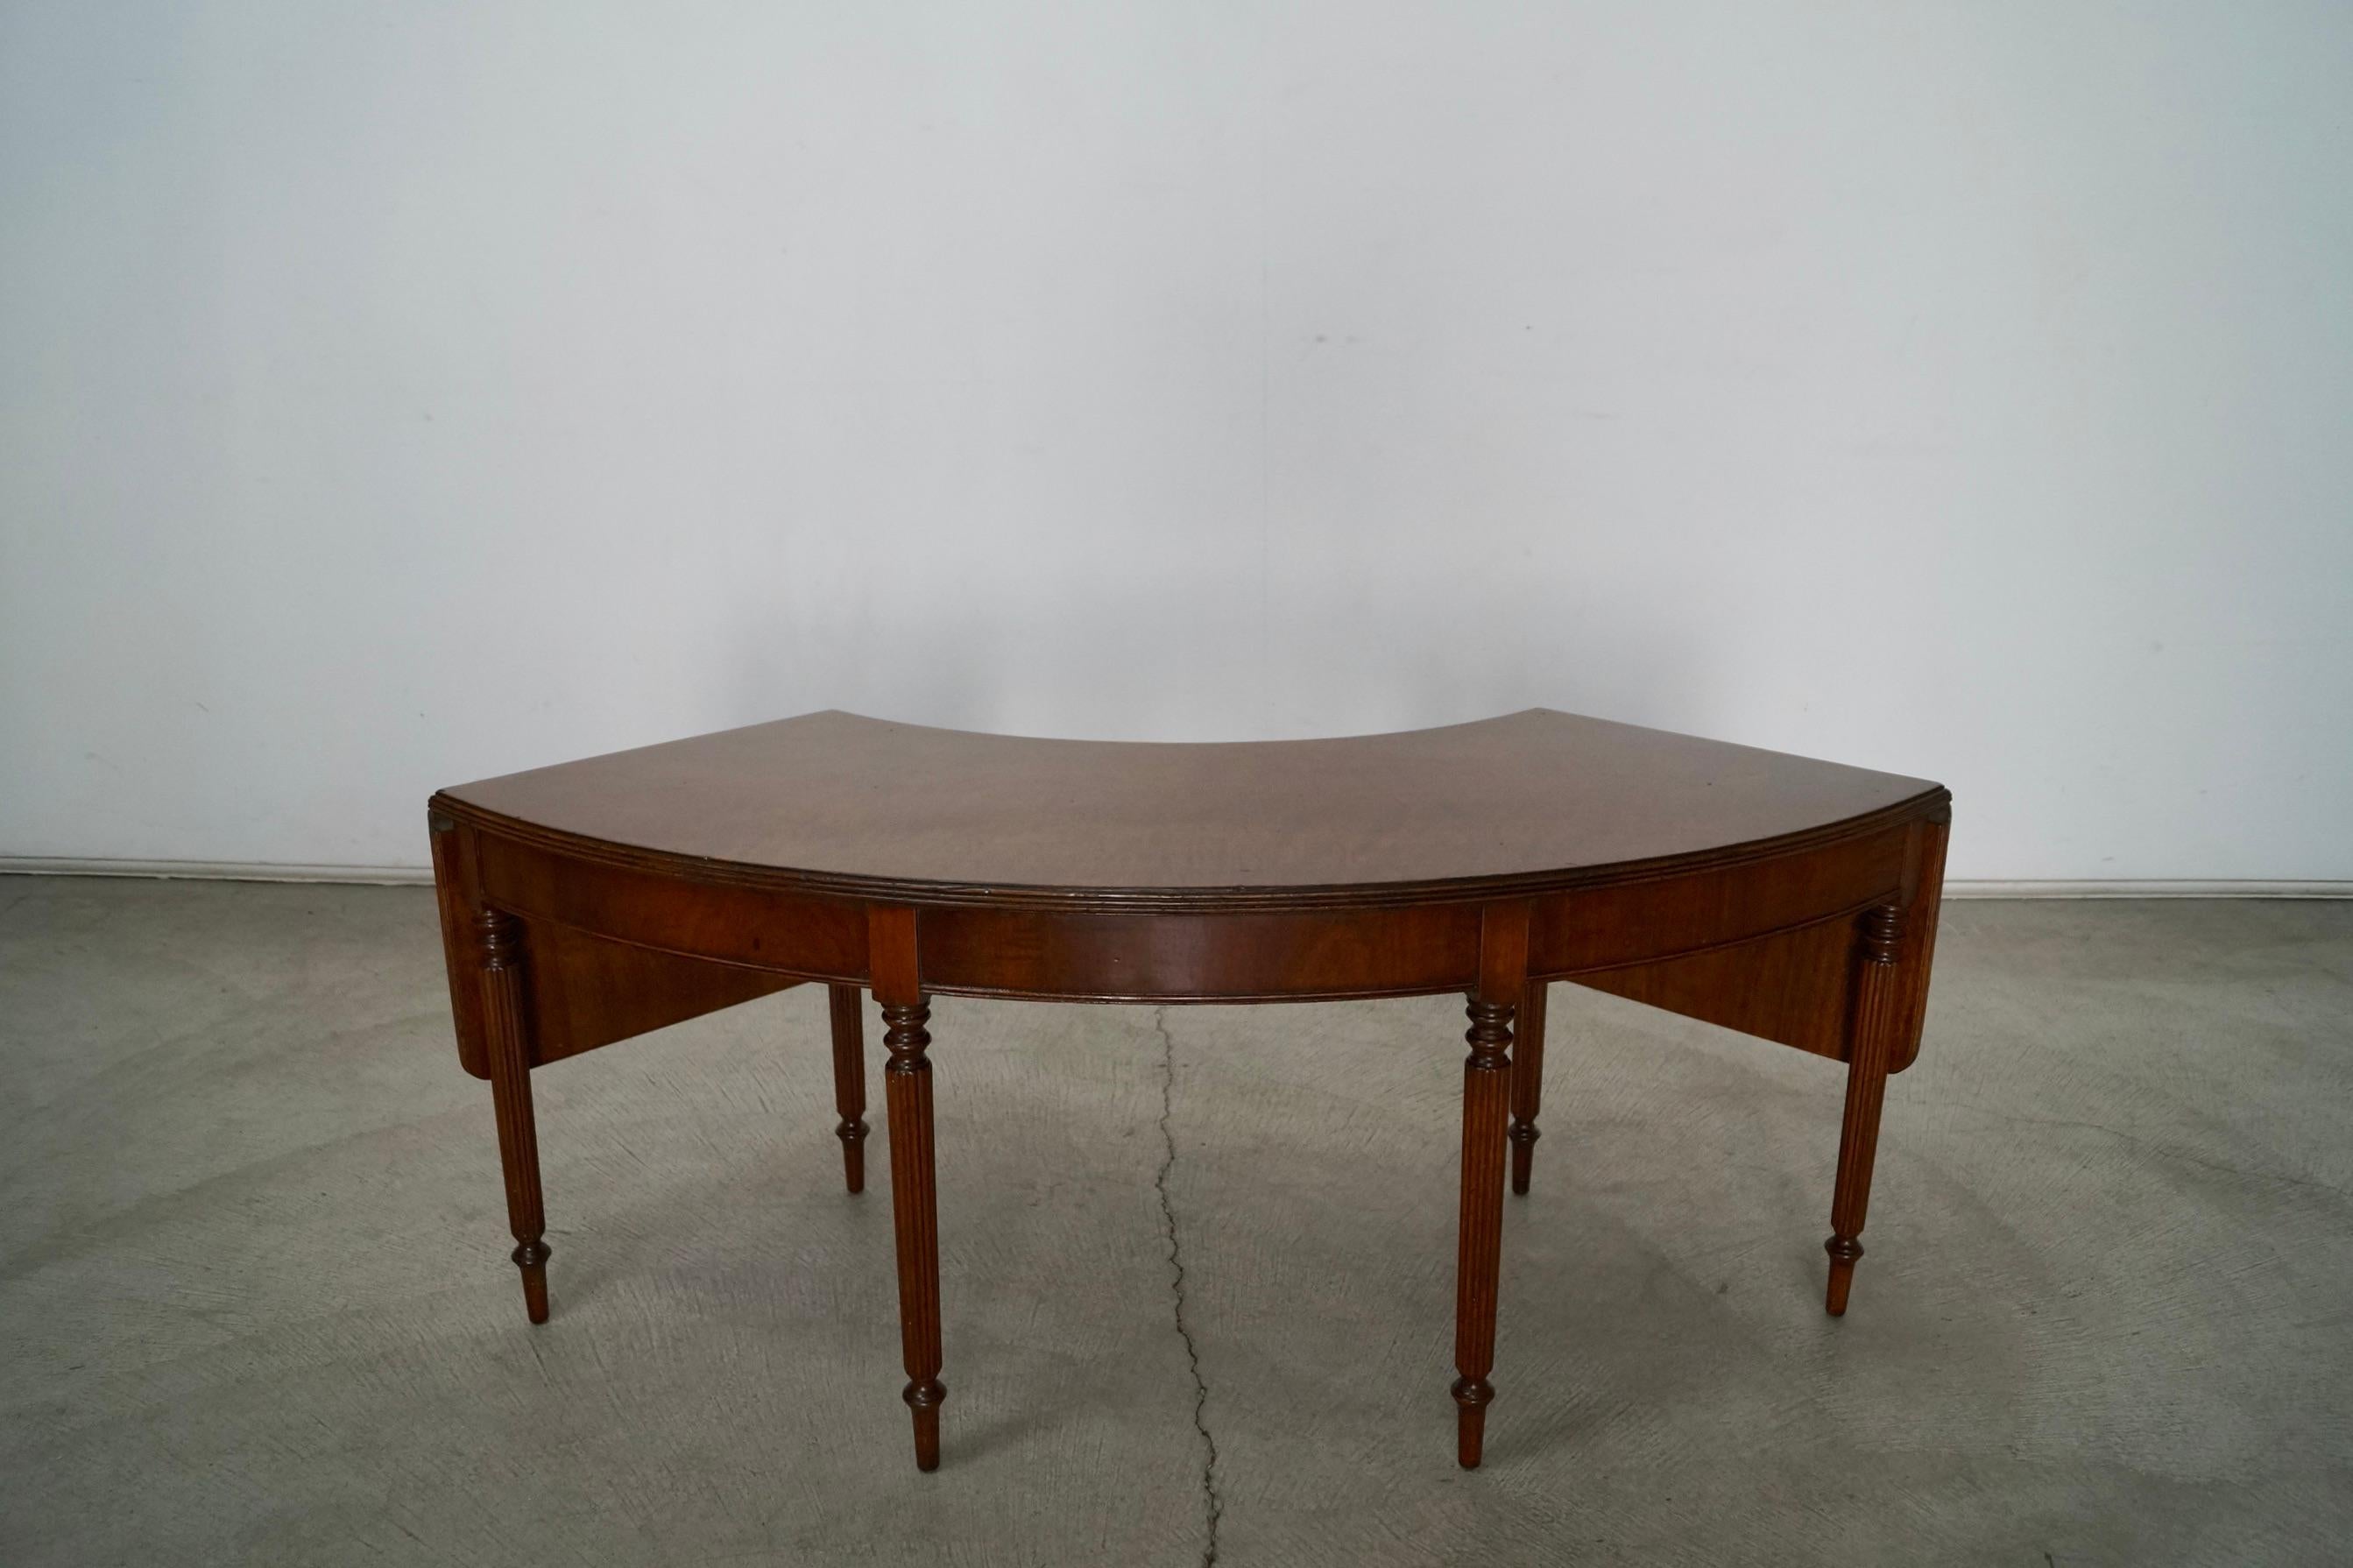 Antique coffee table for sale. Special table that has a half-moon shape and has leaves on either side that extend out. Great design, and in great vintage condition. Made of mahogany with a walnut finish. Has six fluted legs. Has serial number and